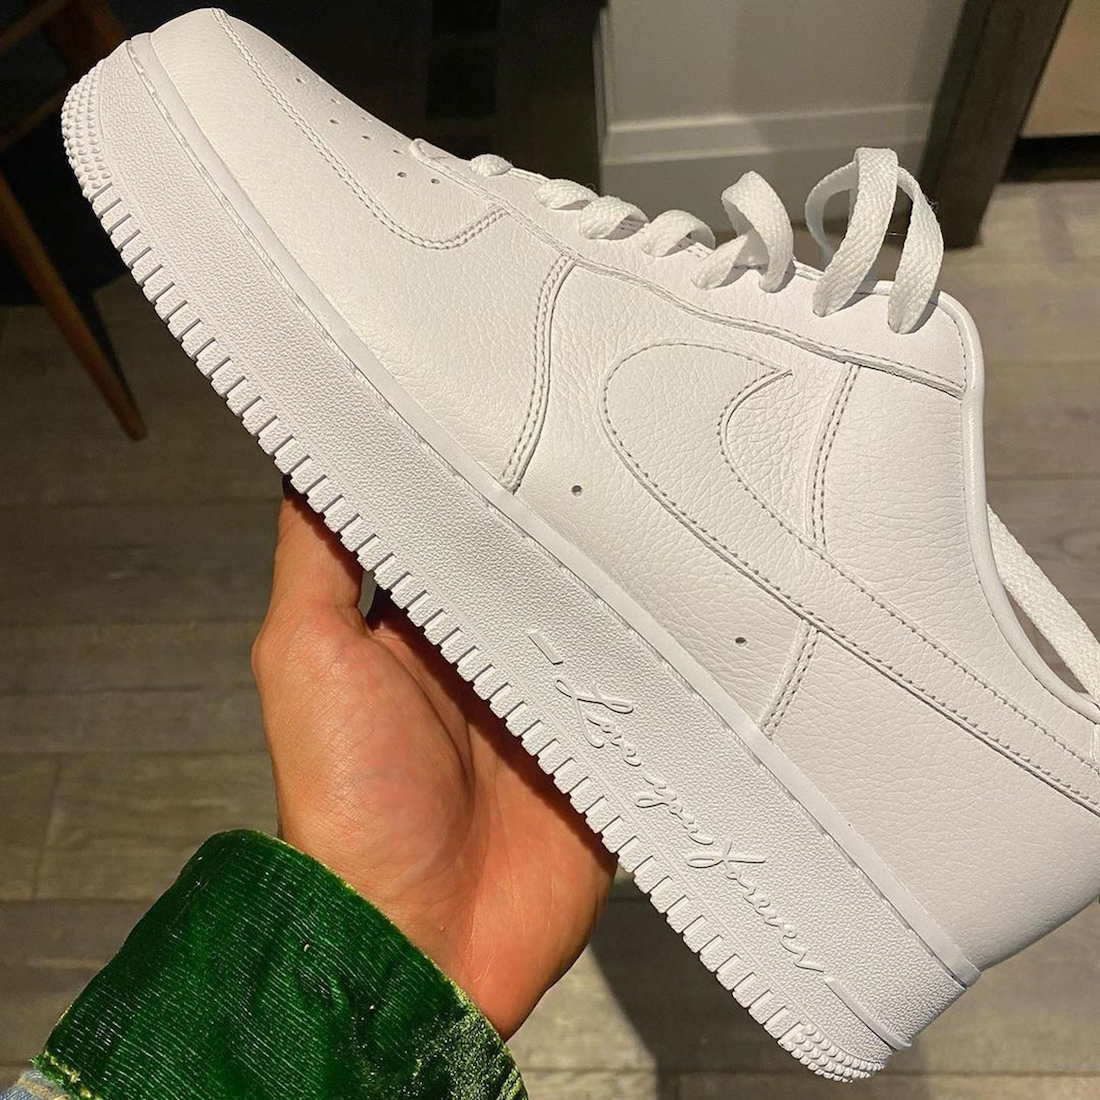 First Look at the “Certified Lover Boy” Drake x Nike Air Force 1